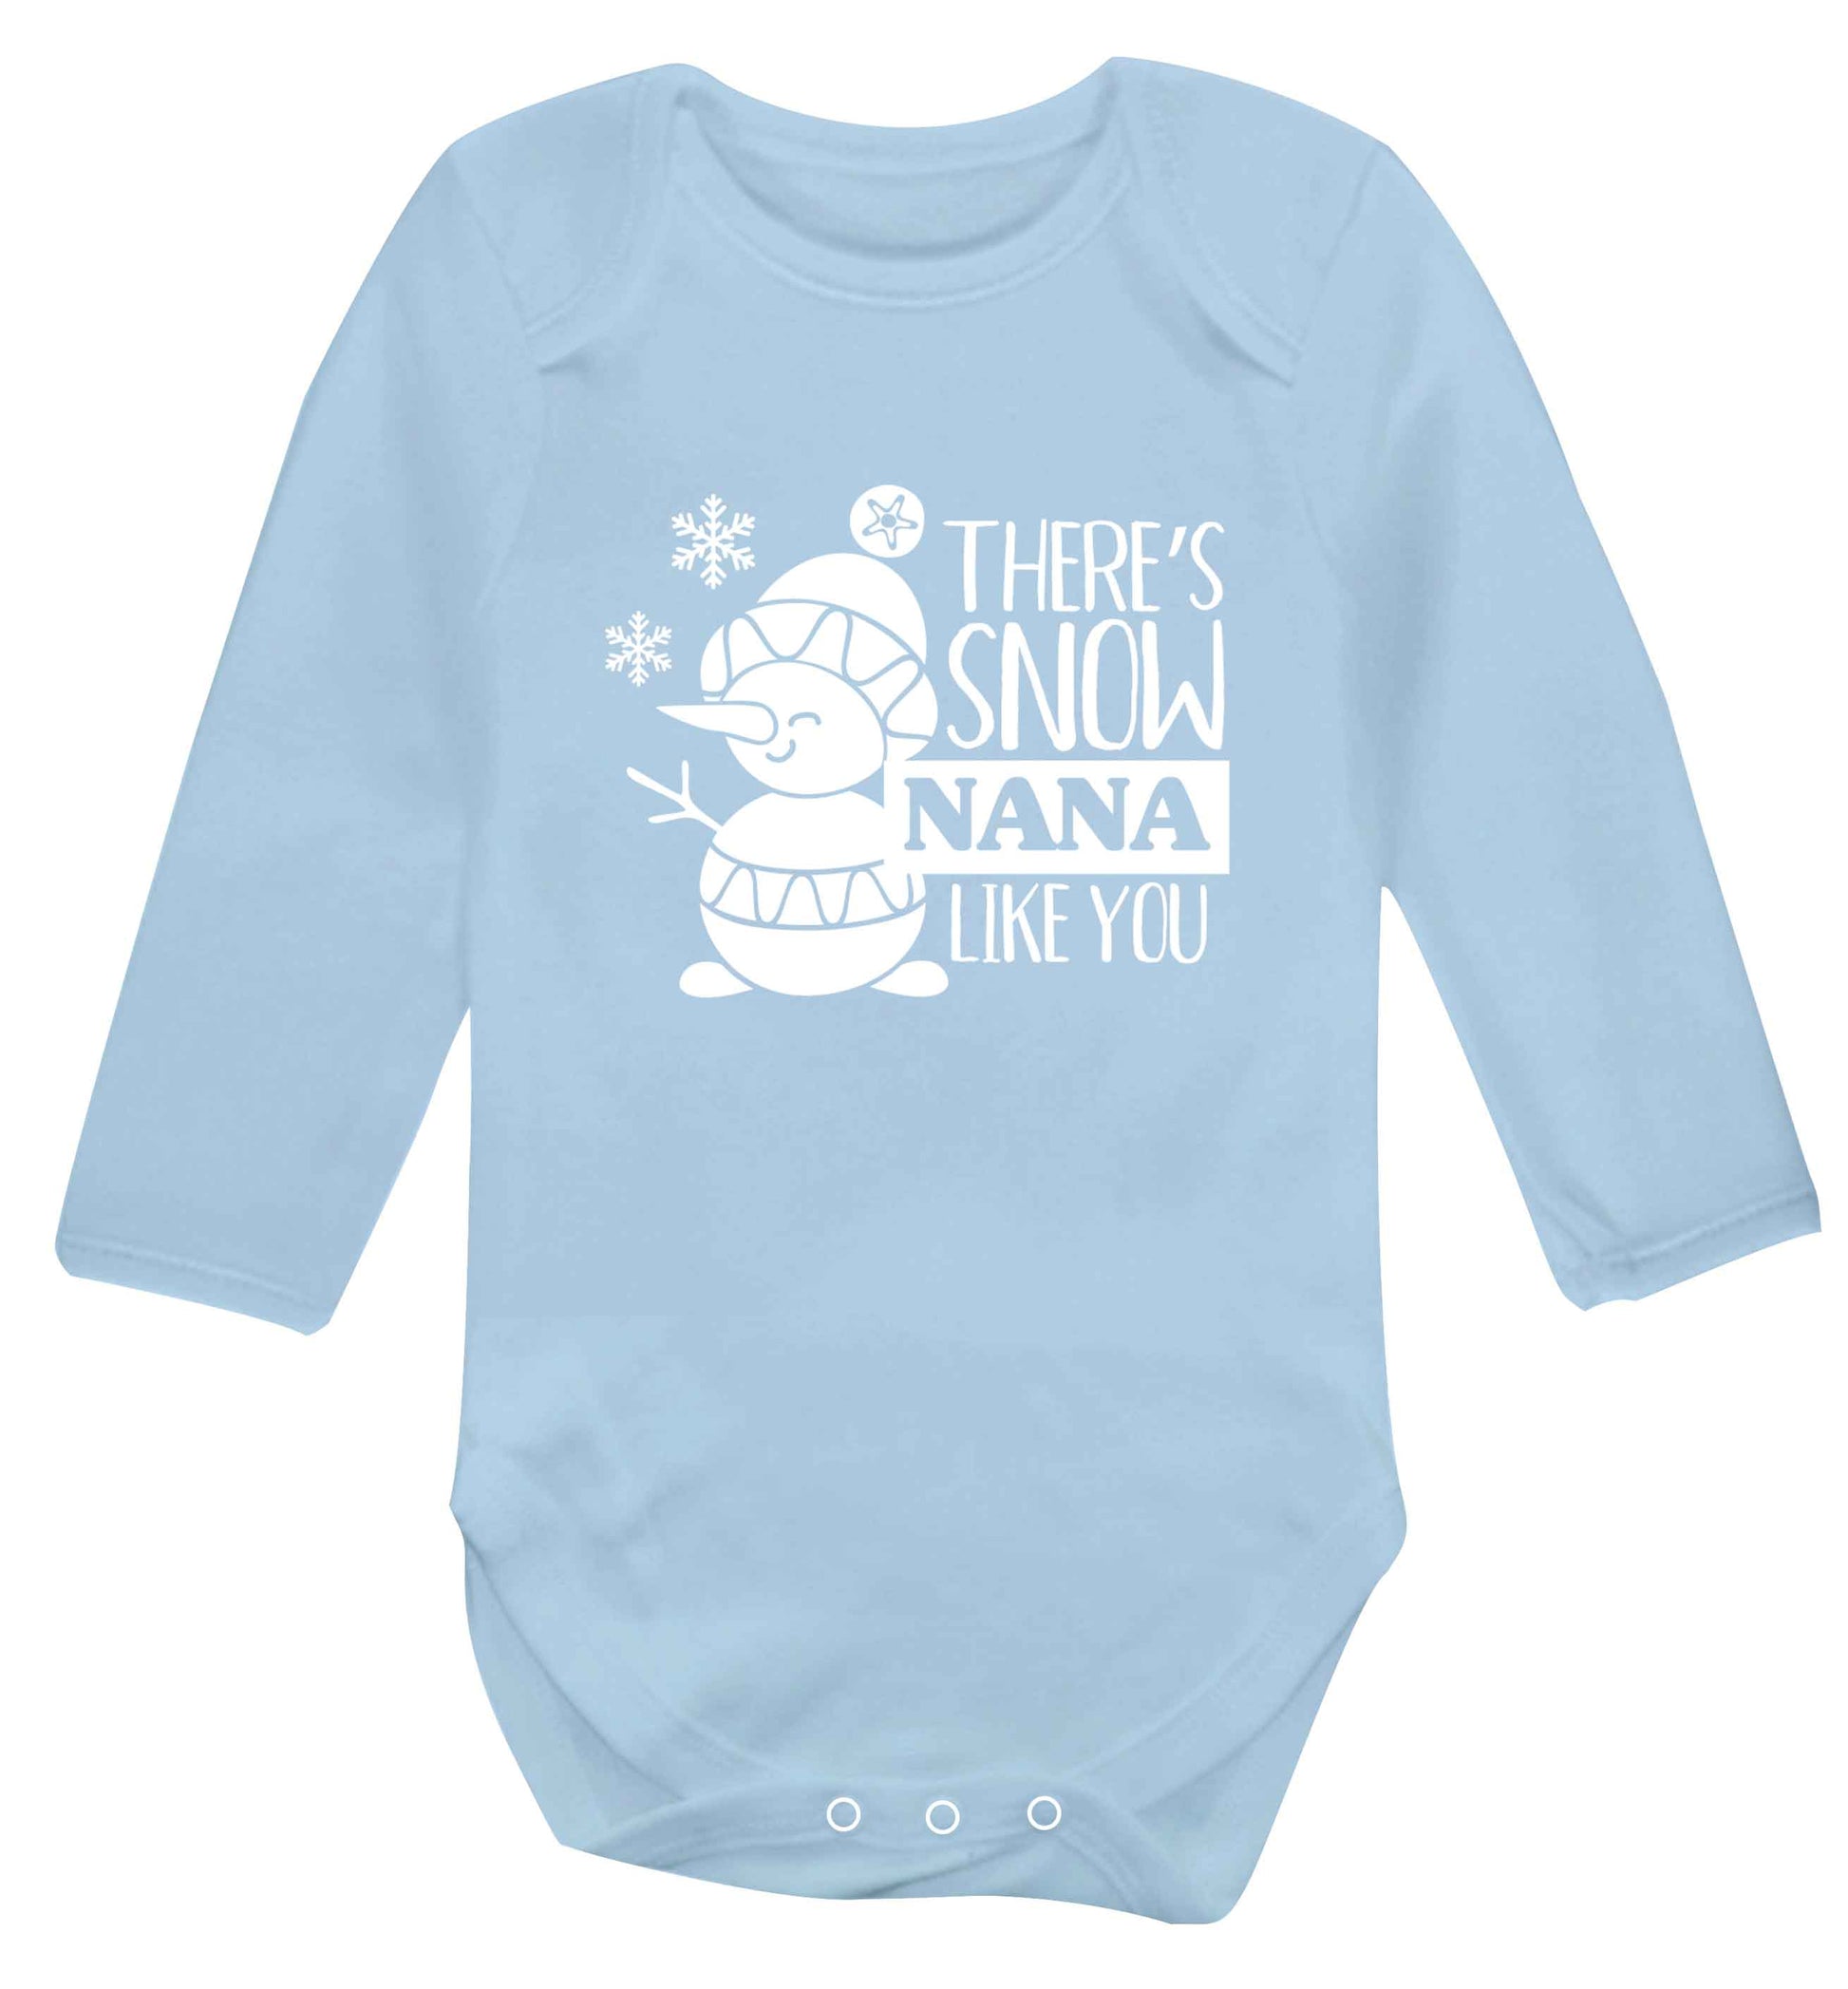 There's snow nana like you baby vest long sleeved pale blue 6-12 months